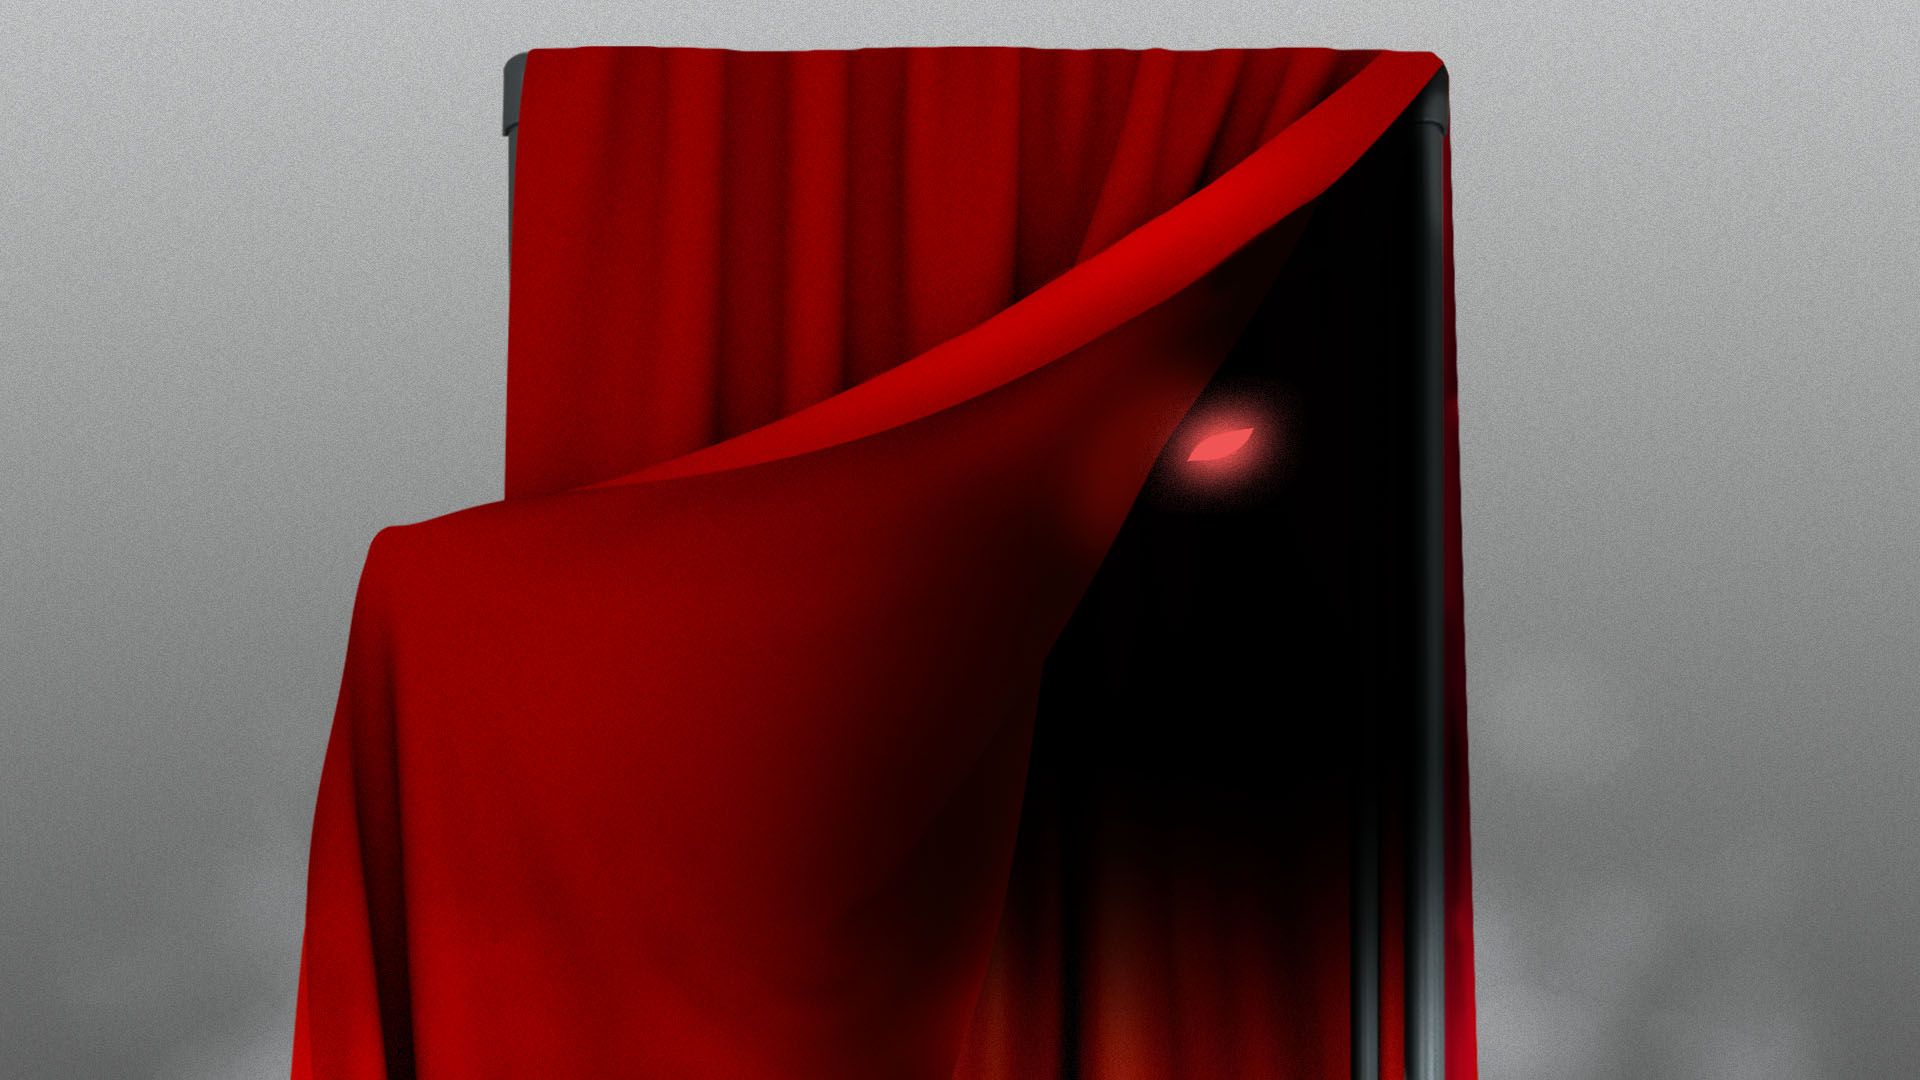 Illustration of an election booth with an open curtain and glowing eye peering out